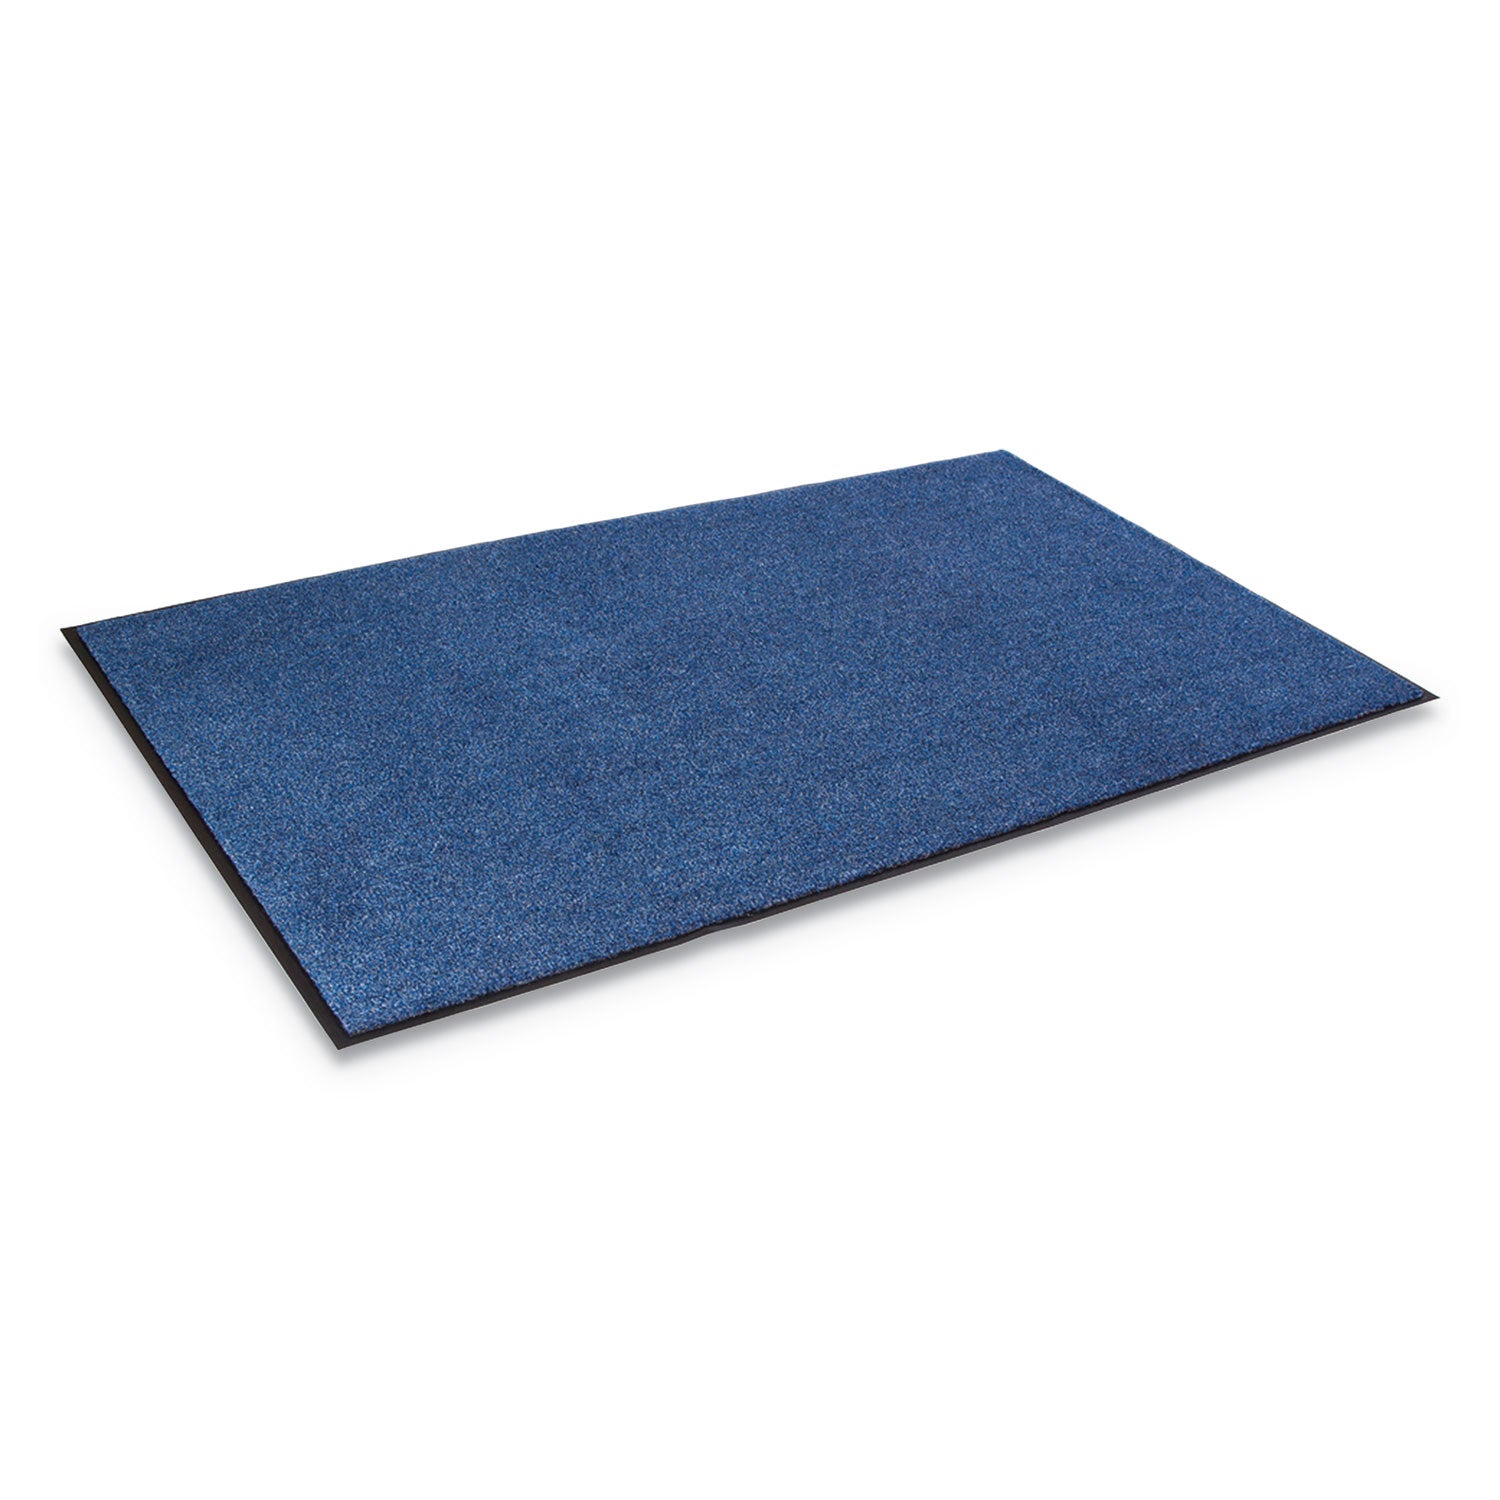 Rely-On Olefin Indoor Wiper Mat, 48 x 72, Marlin Blue - 